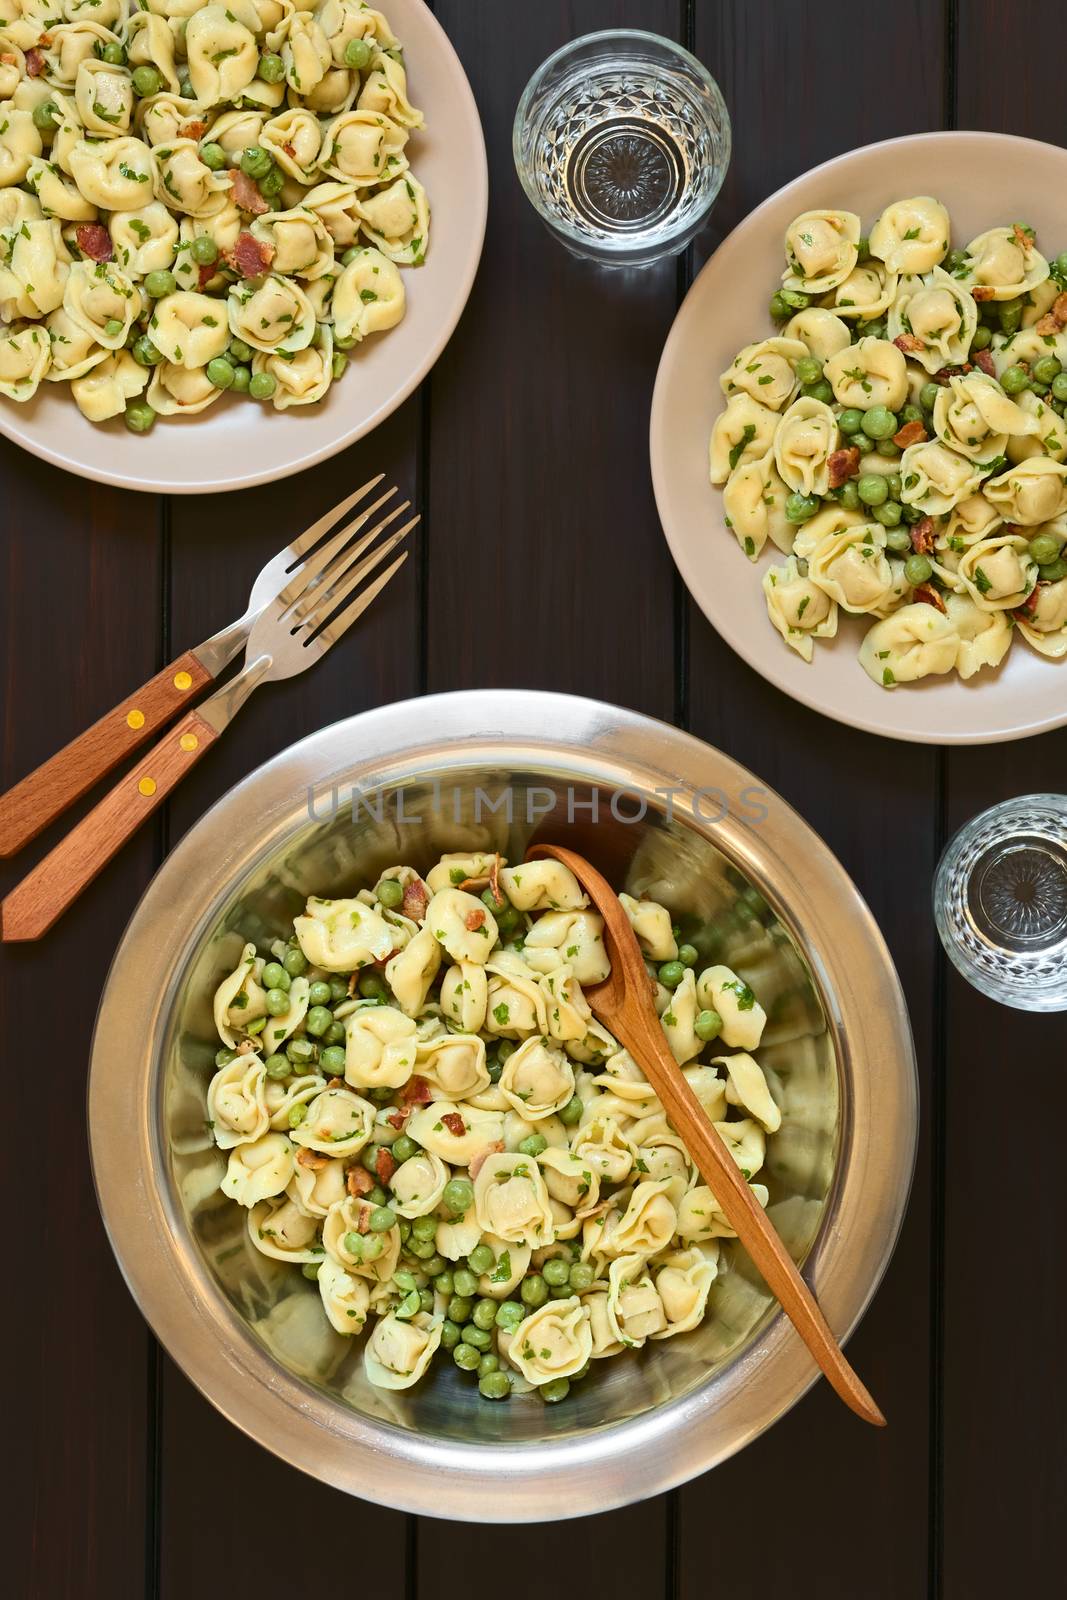 Tortellini salad with green peas, fried bacon and parsley in big salad bowl with spoon to serve, salad served on two plates, forks and glasses, photographed overhead on dark wood with natural light